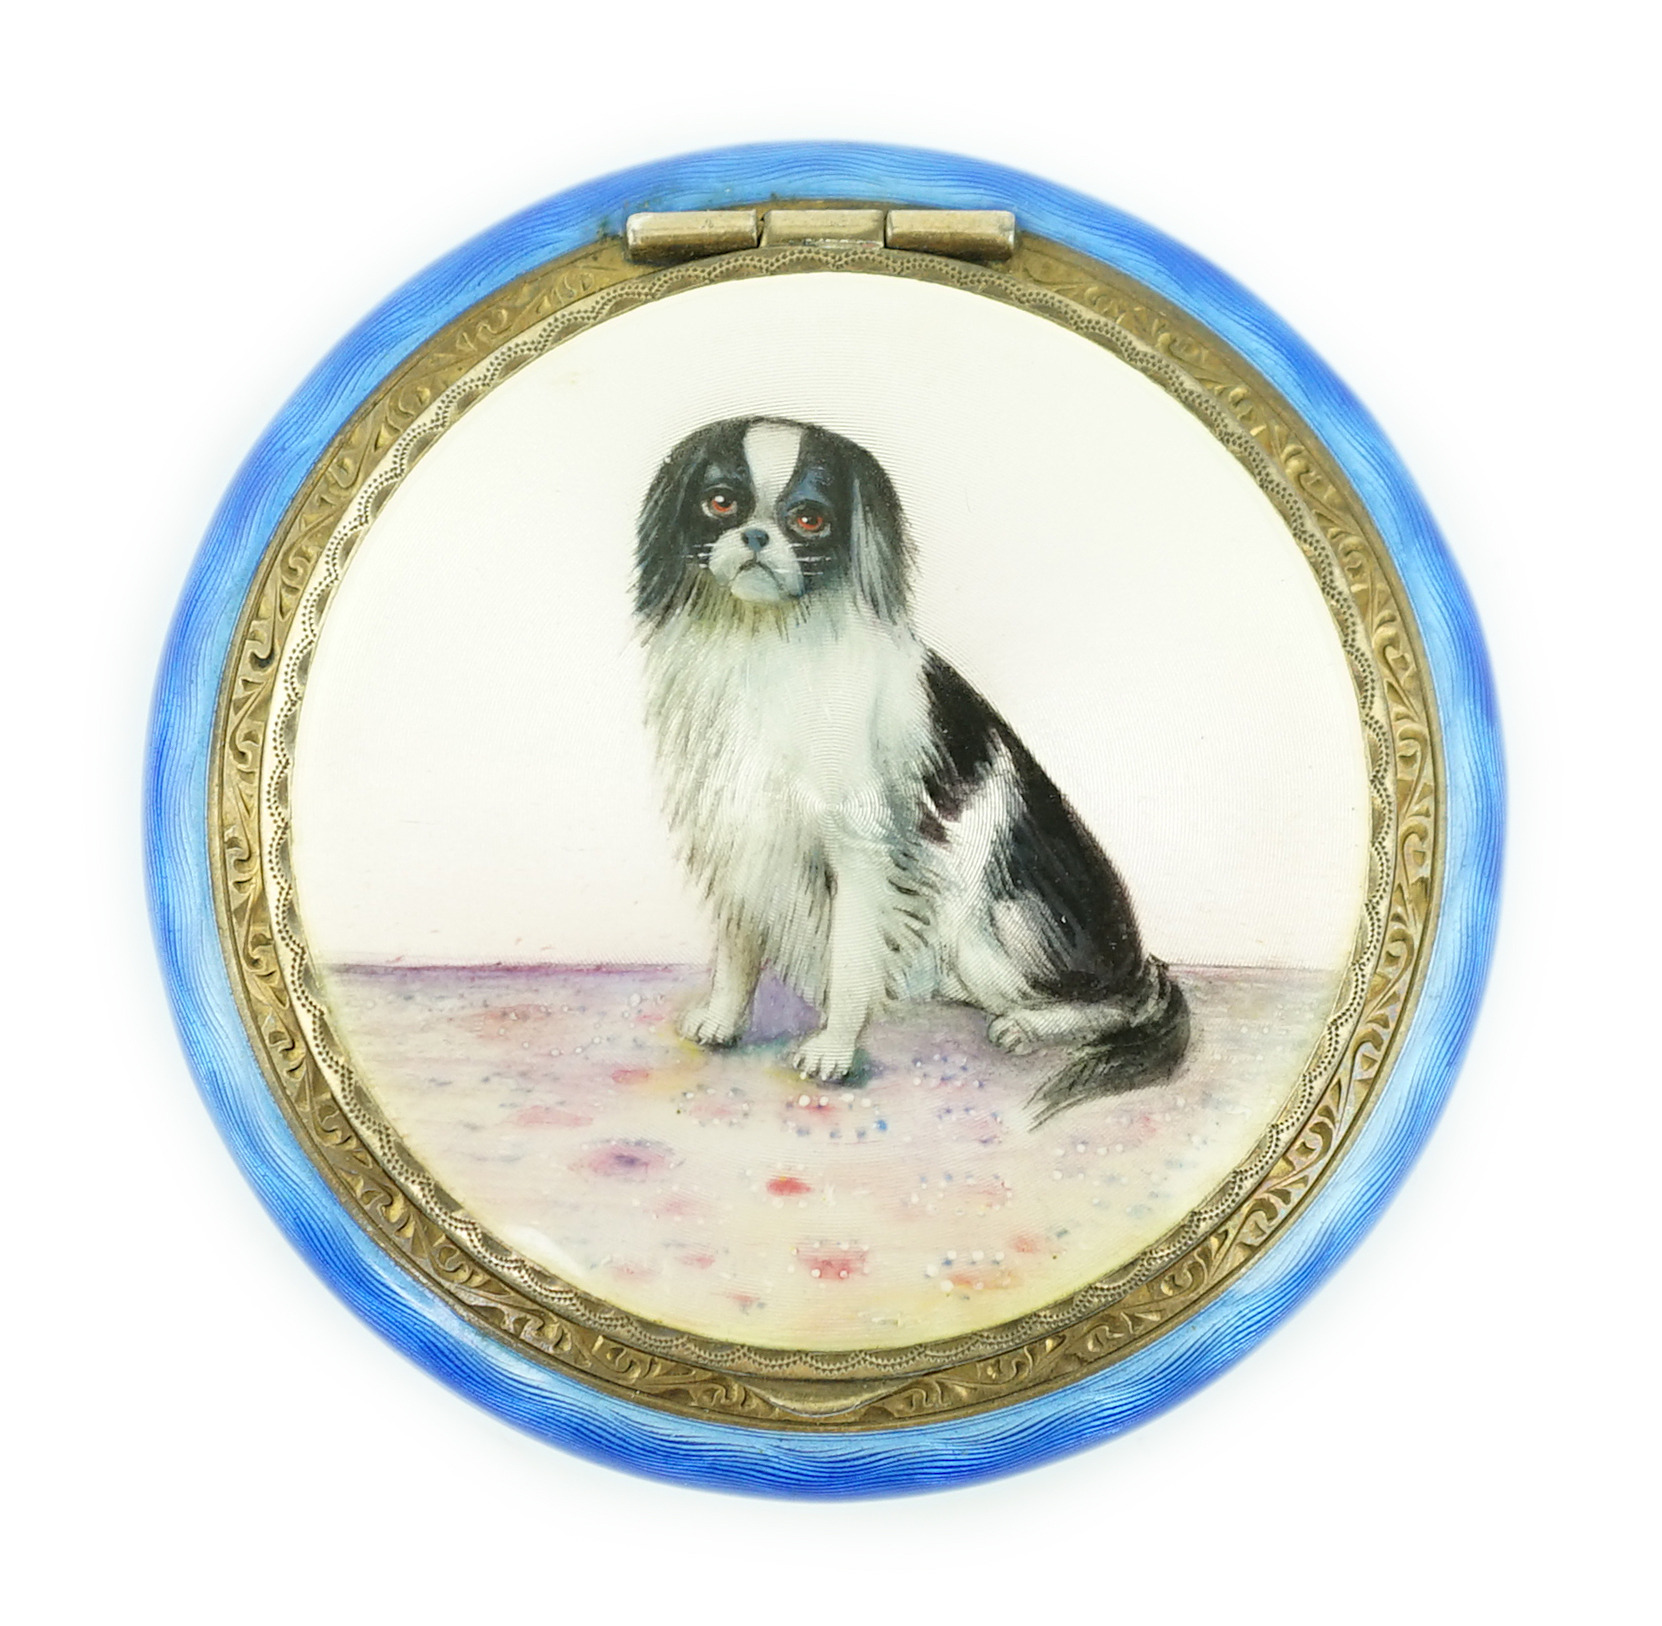 A George V silver gilt and enamel circular compact, decorated with a seated dog, import marks for P.H. Vogel